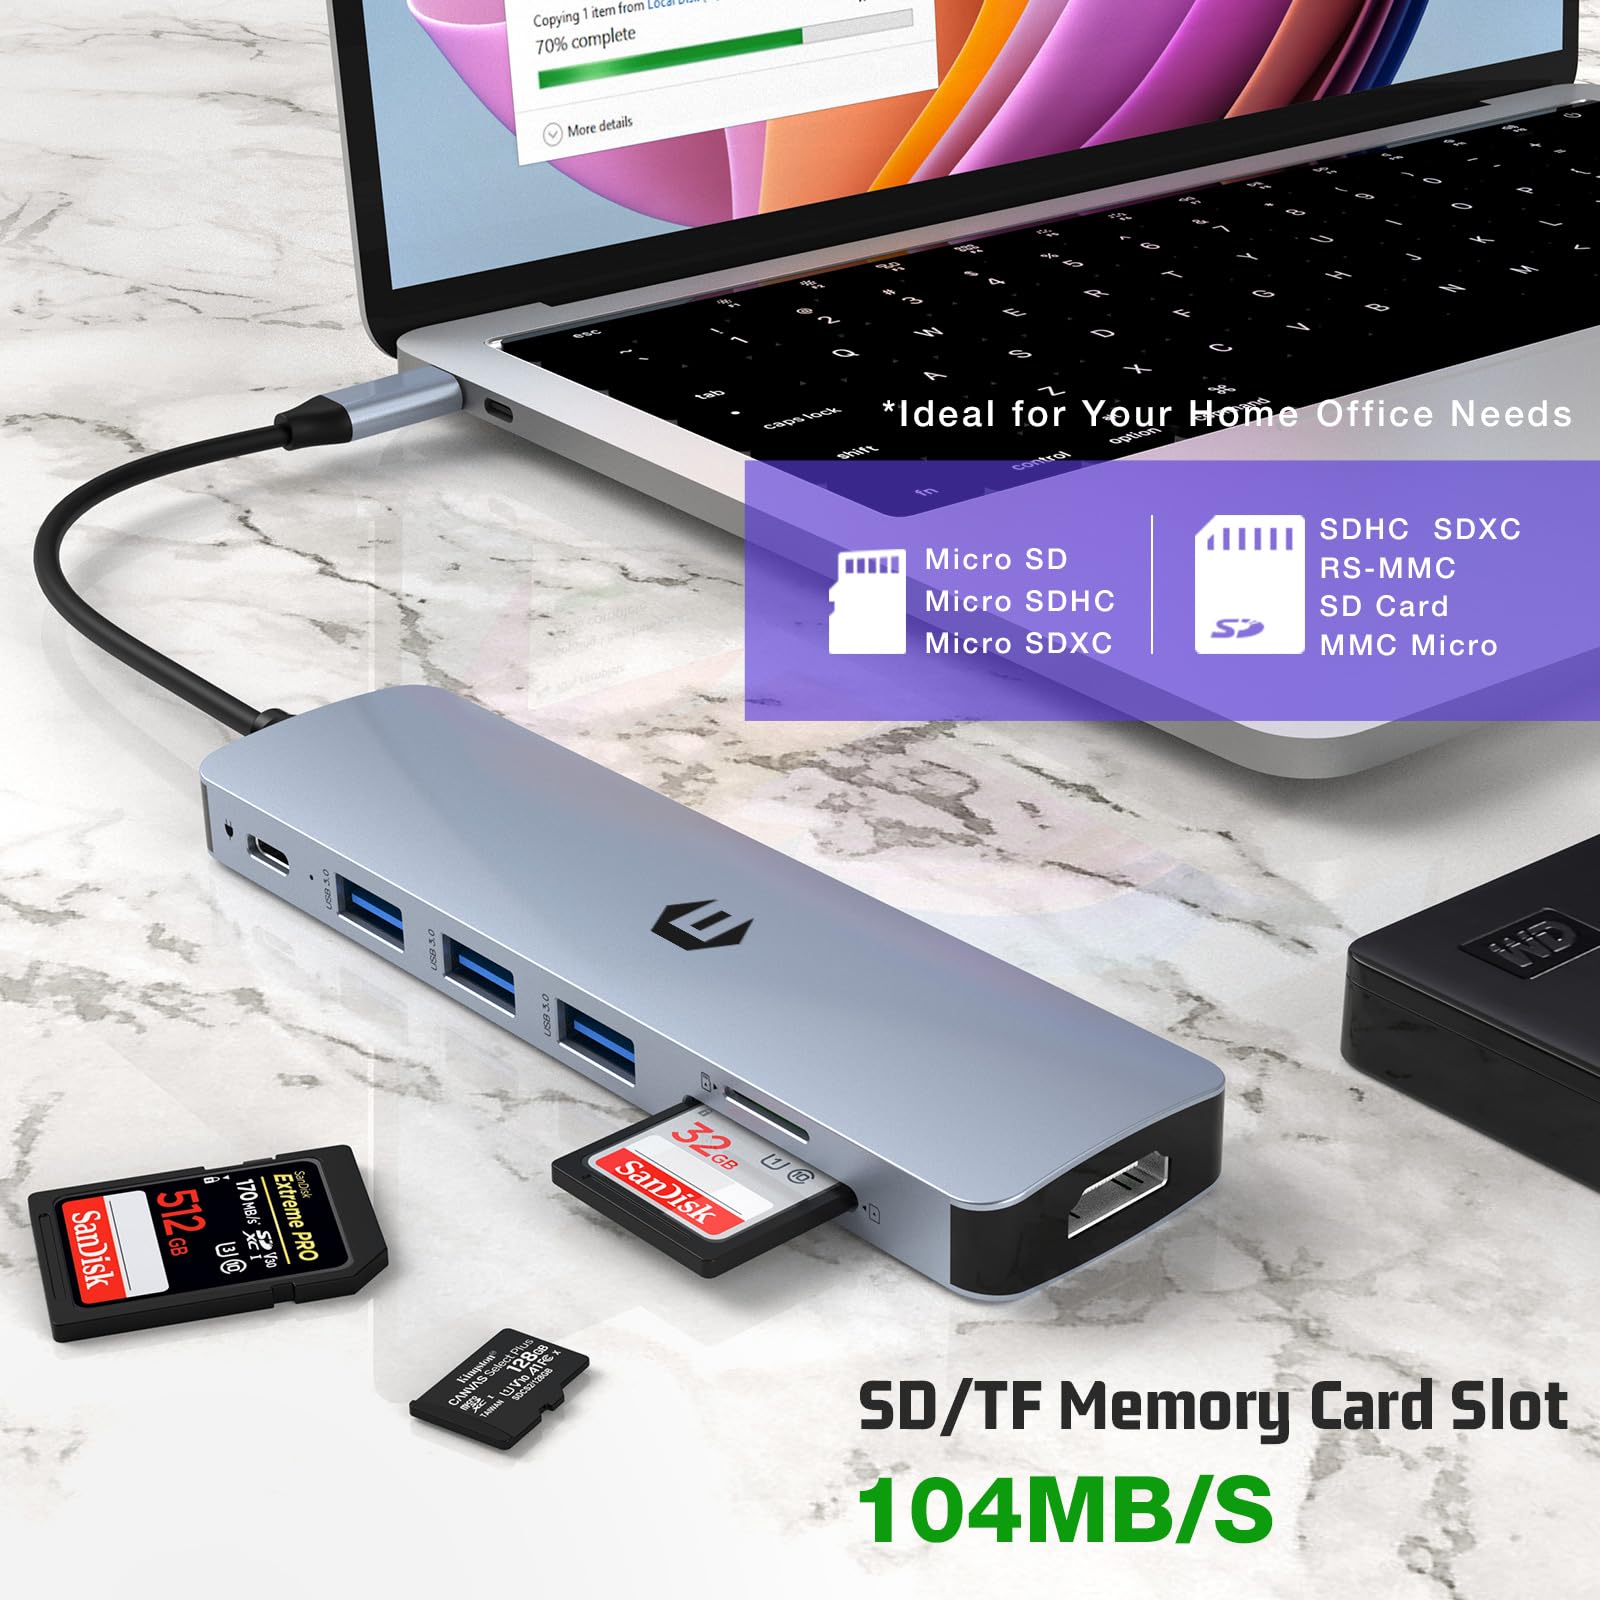 oditton 7 in 1 USB C HUB, Laptop Multiport Adapter Hub with HDMI Output, 100W PD, 3 x USB 3.0 Ports, SD/TF Reader, Compatible for USB C Laptops Dell XPS/HP/Surface and More